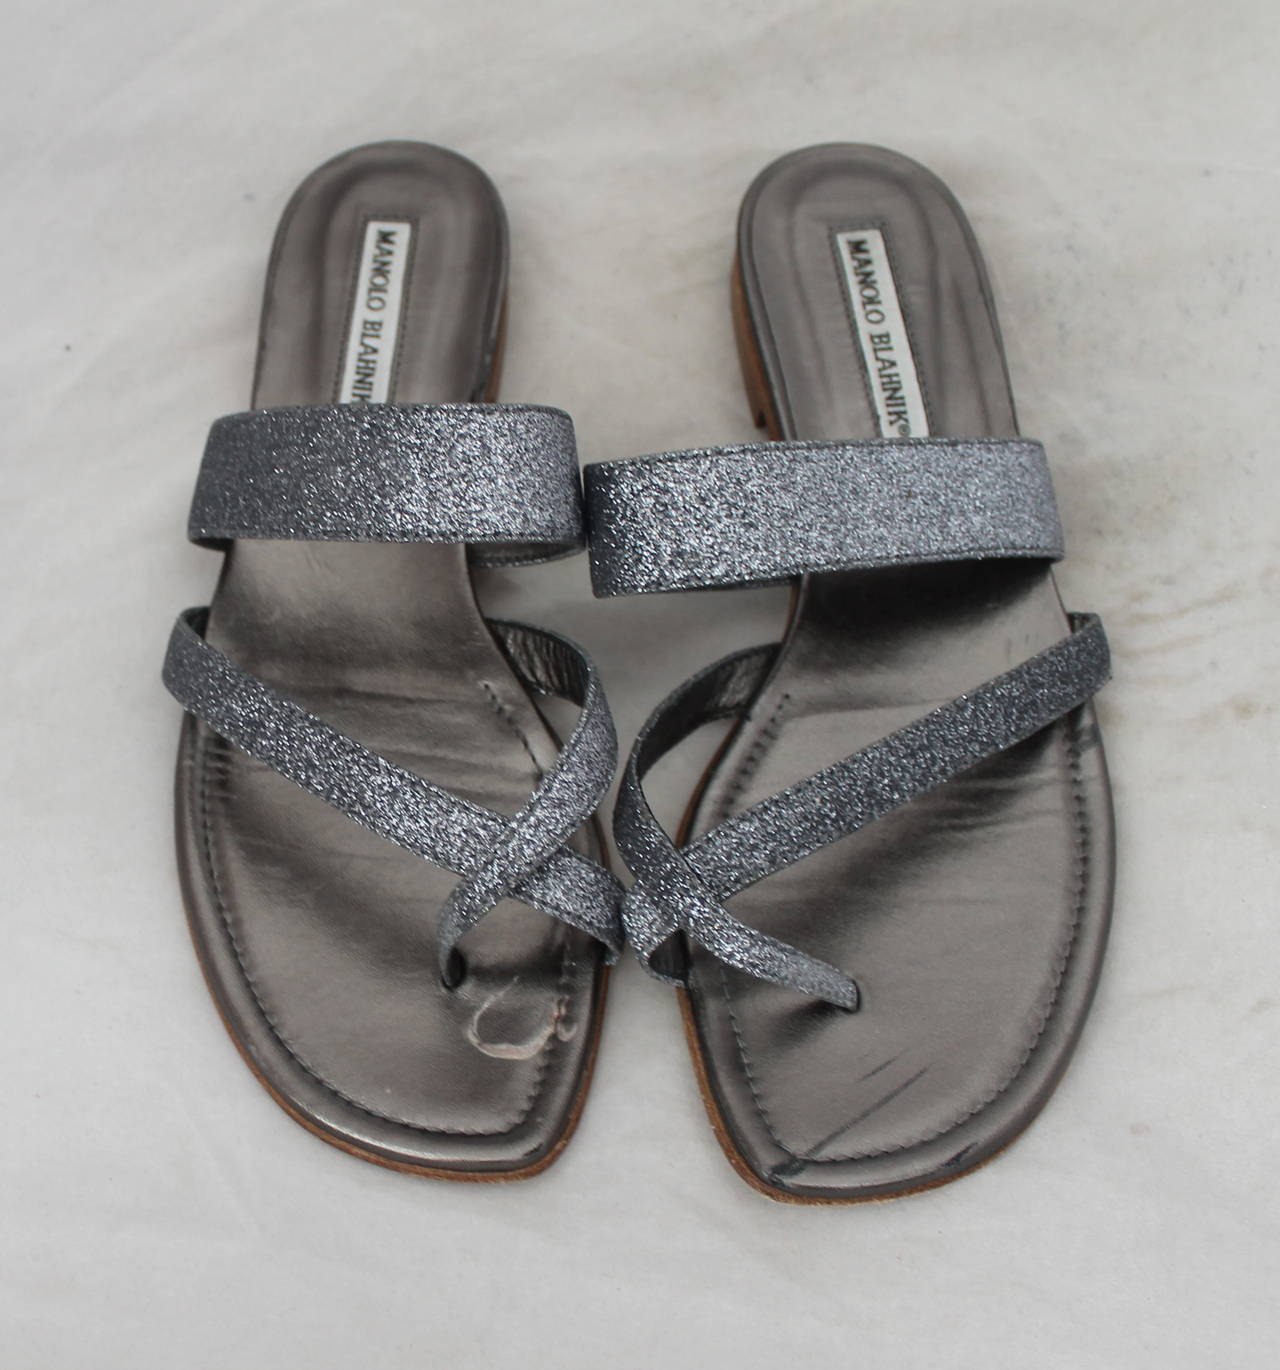 Manolo Blahnik Gunmetal Silver Glitter Sandals - 38.5. These sandals are in good condition and have some wear on the sole.